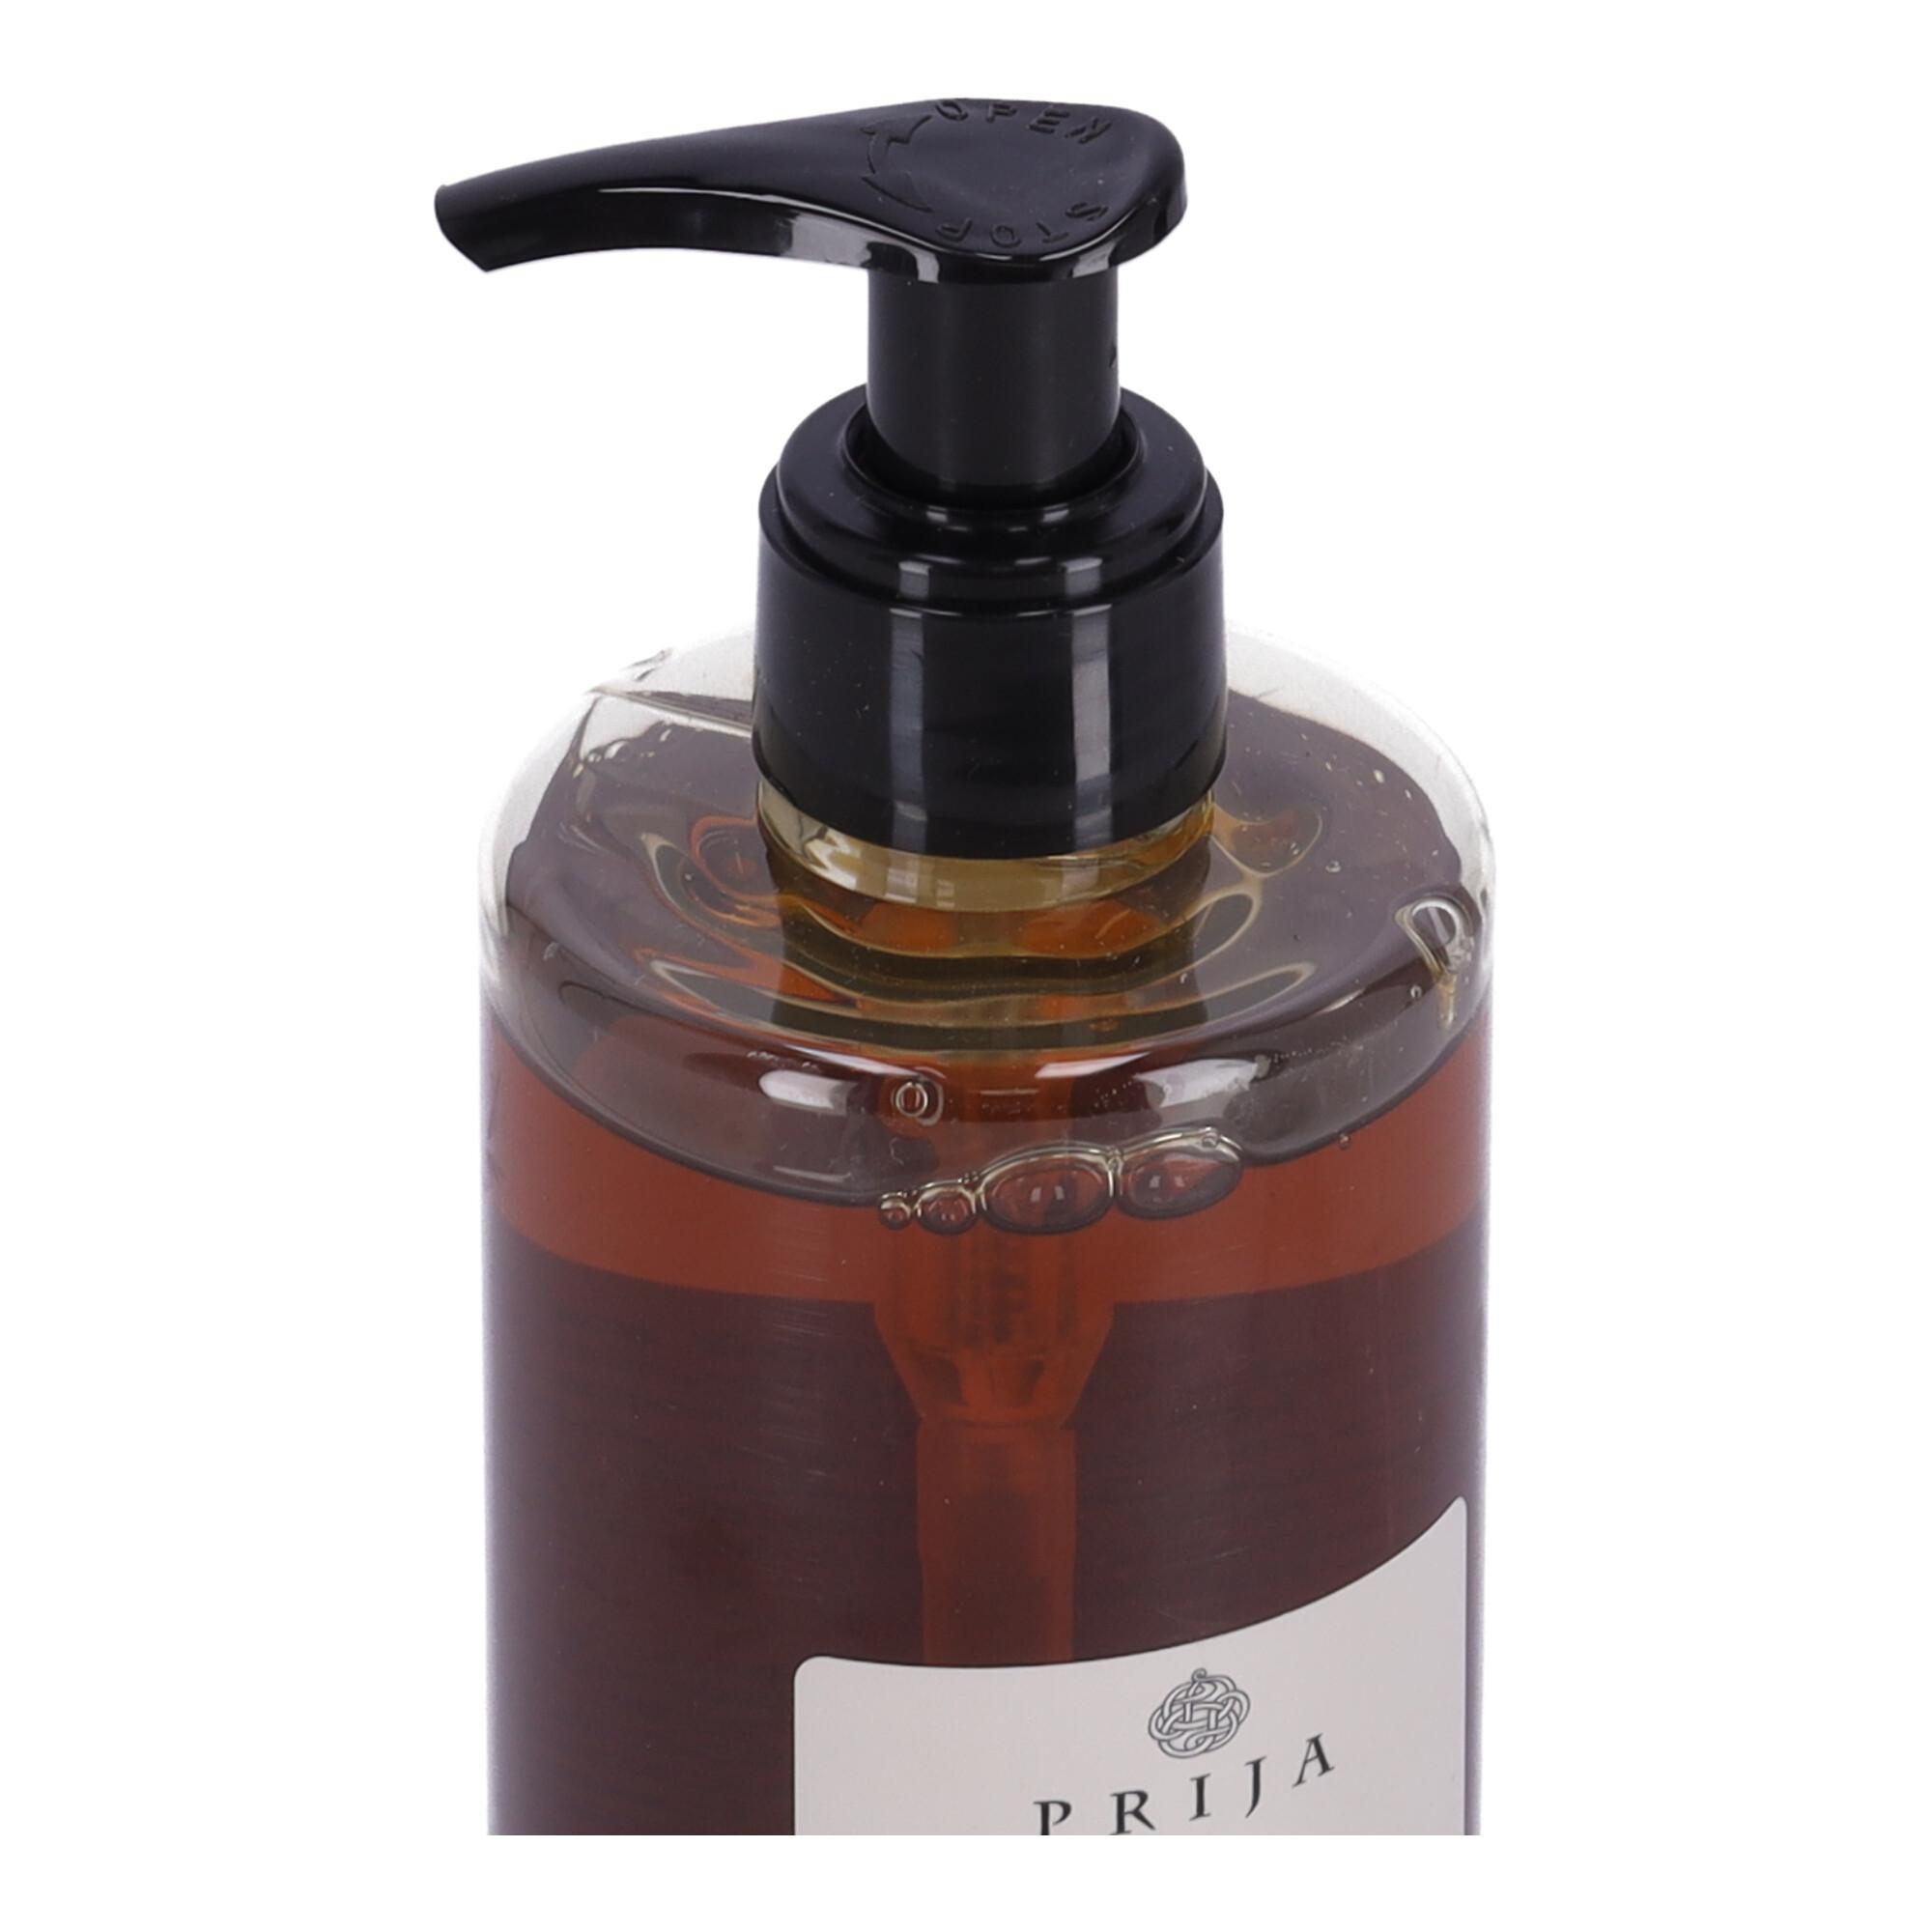 The Prija 2-in-1 Shampoo and Shower Gel with Ginseng 380 ml